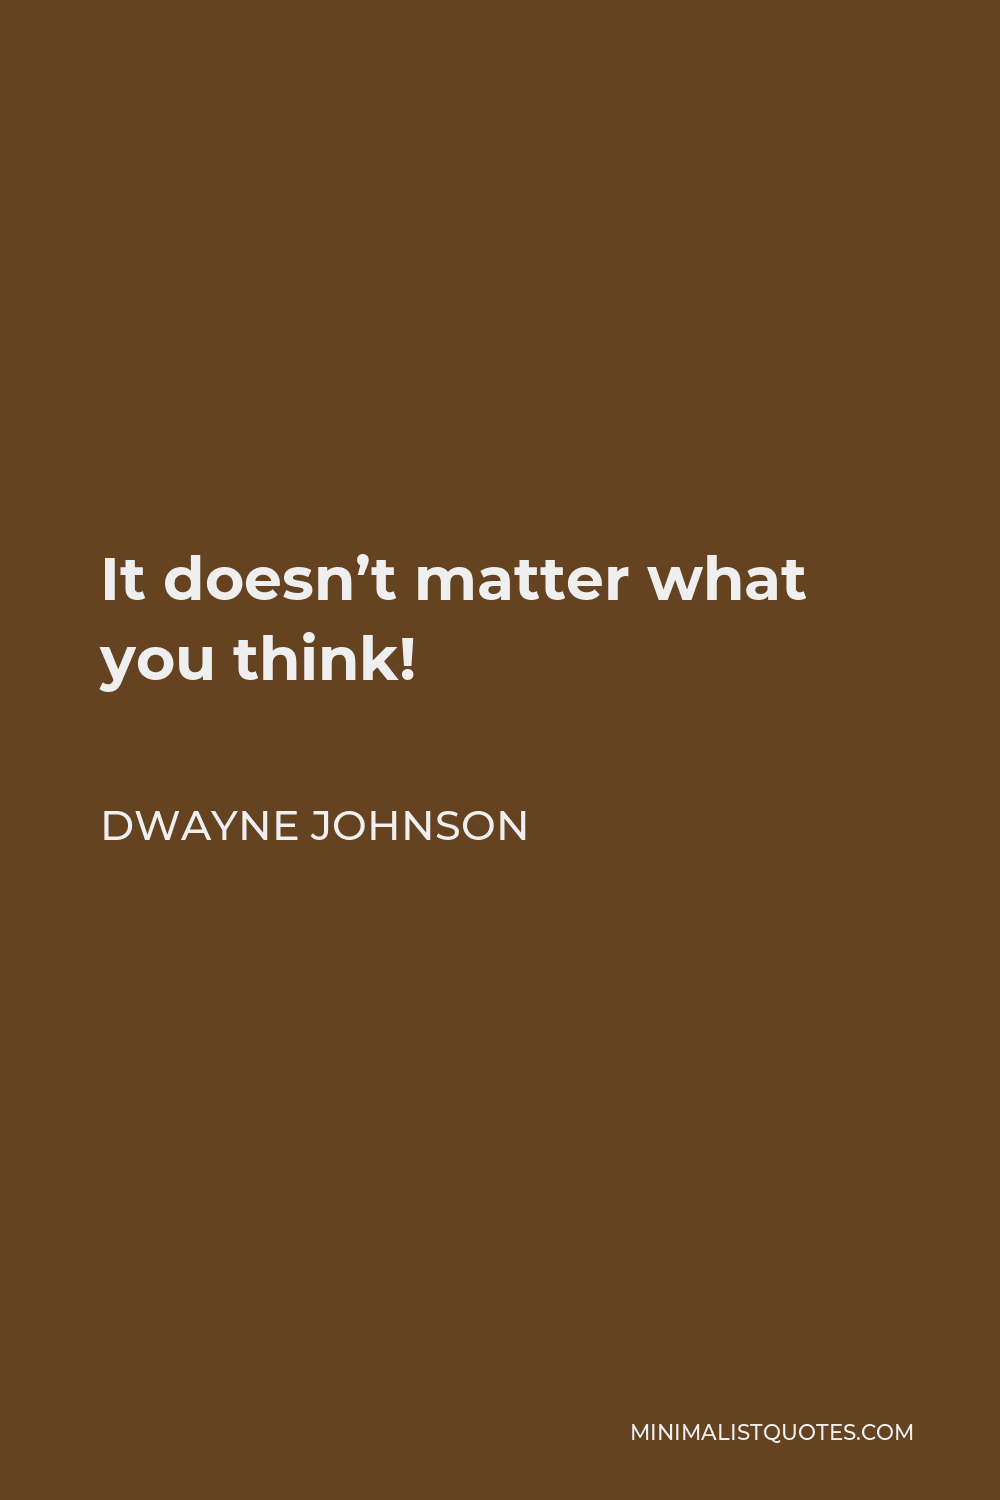 Dwayne Johnson Quote - It doesn’t matter what you think!